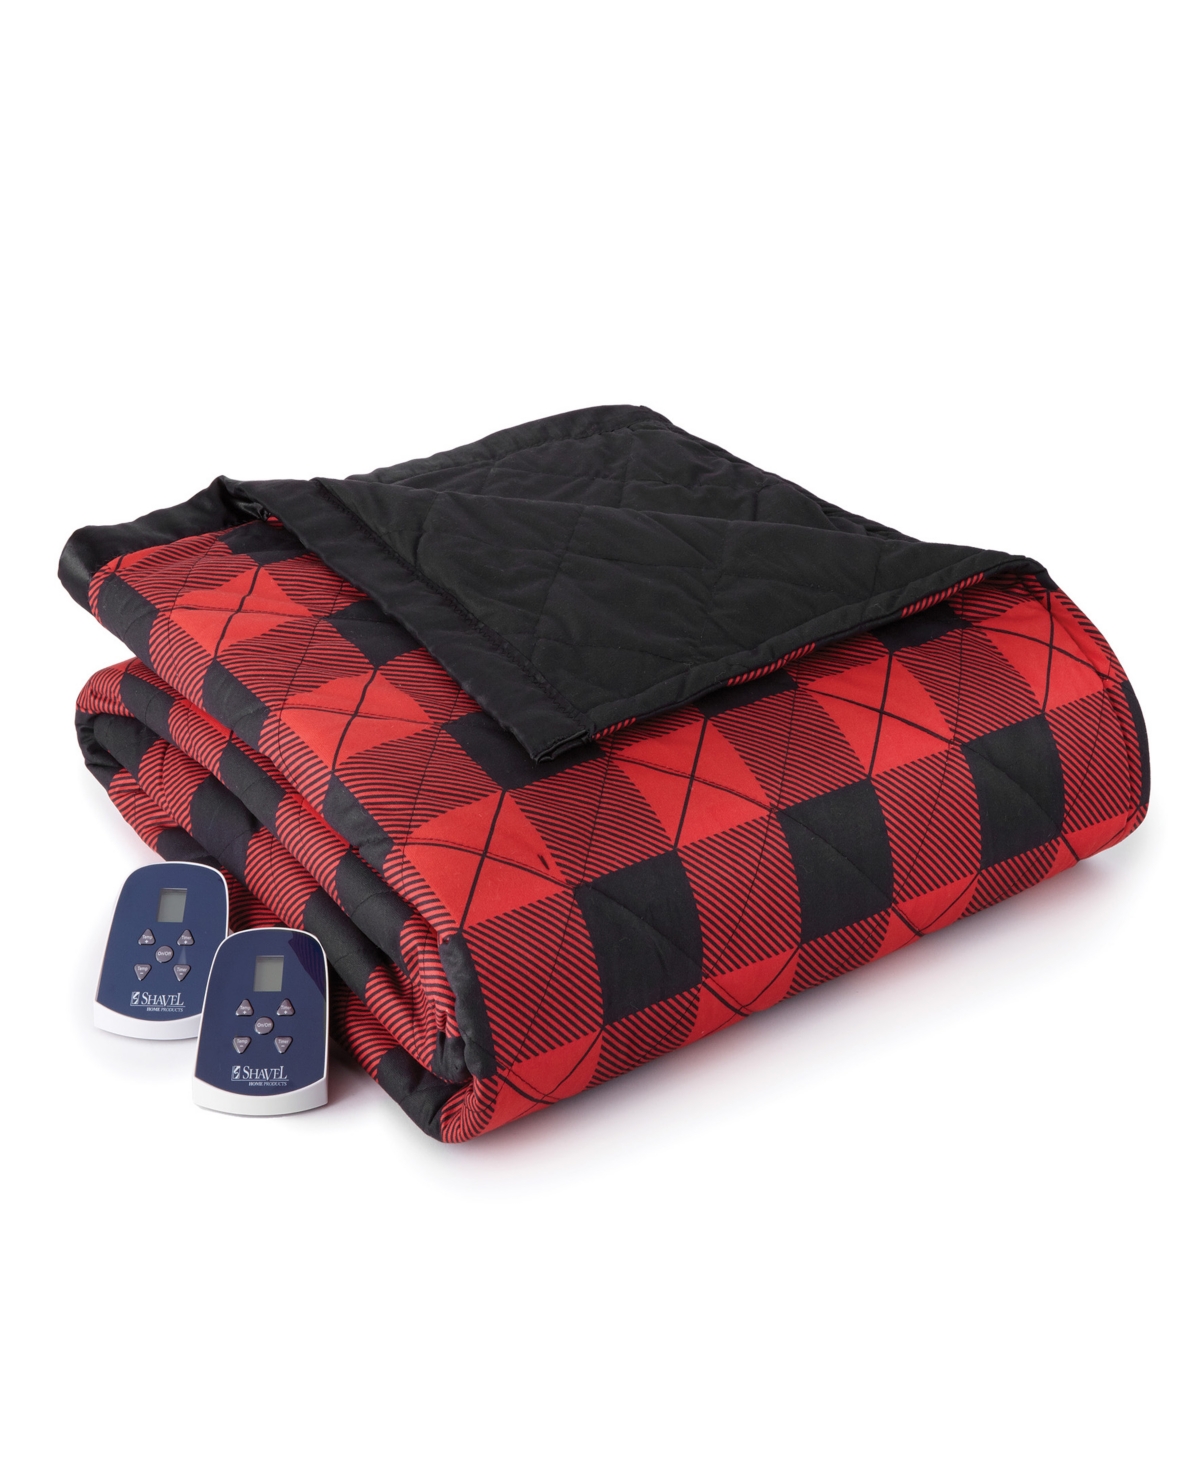 Shavel Micro Flannel 7 Layers Of Warmth Queen Electric Blanket In Buffalo Check Red